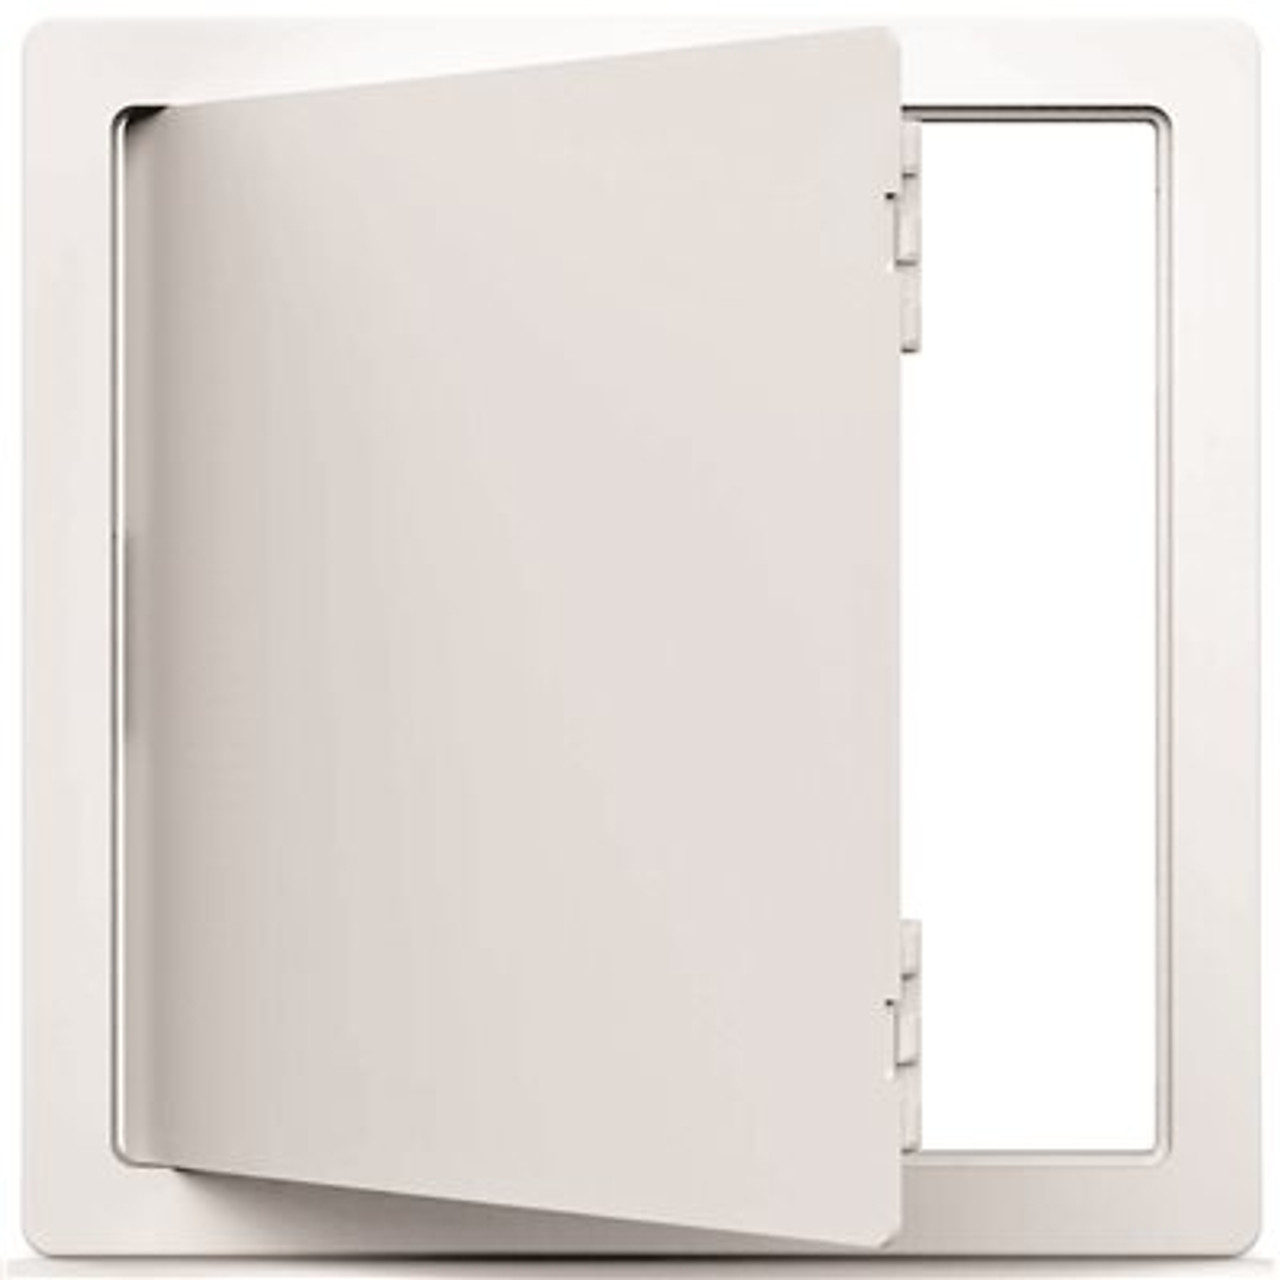 Acudor Products 18 in. x 18 in. Plastic Wall or Ceiling Access Panel